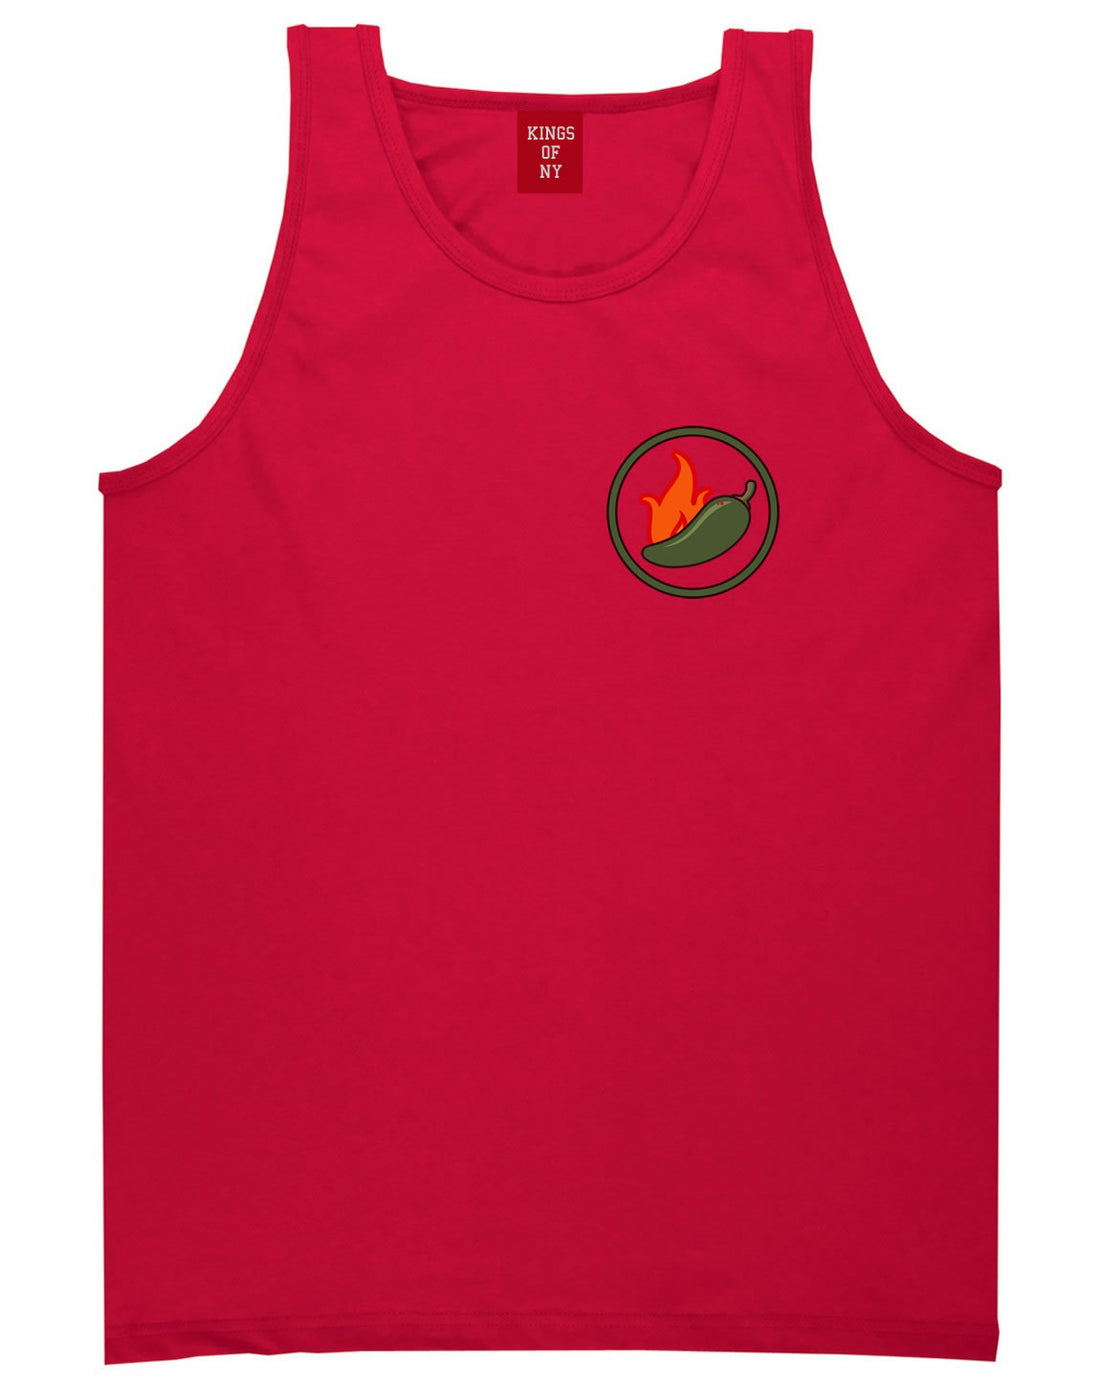 Jalapeno Hot Pepper Chest Mens Tank Top Shirt Red